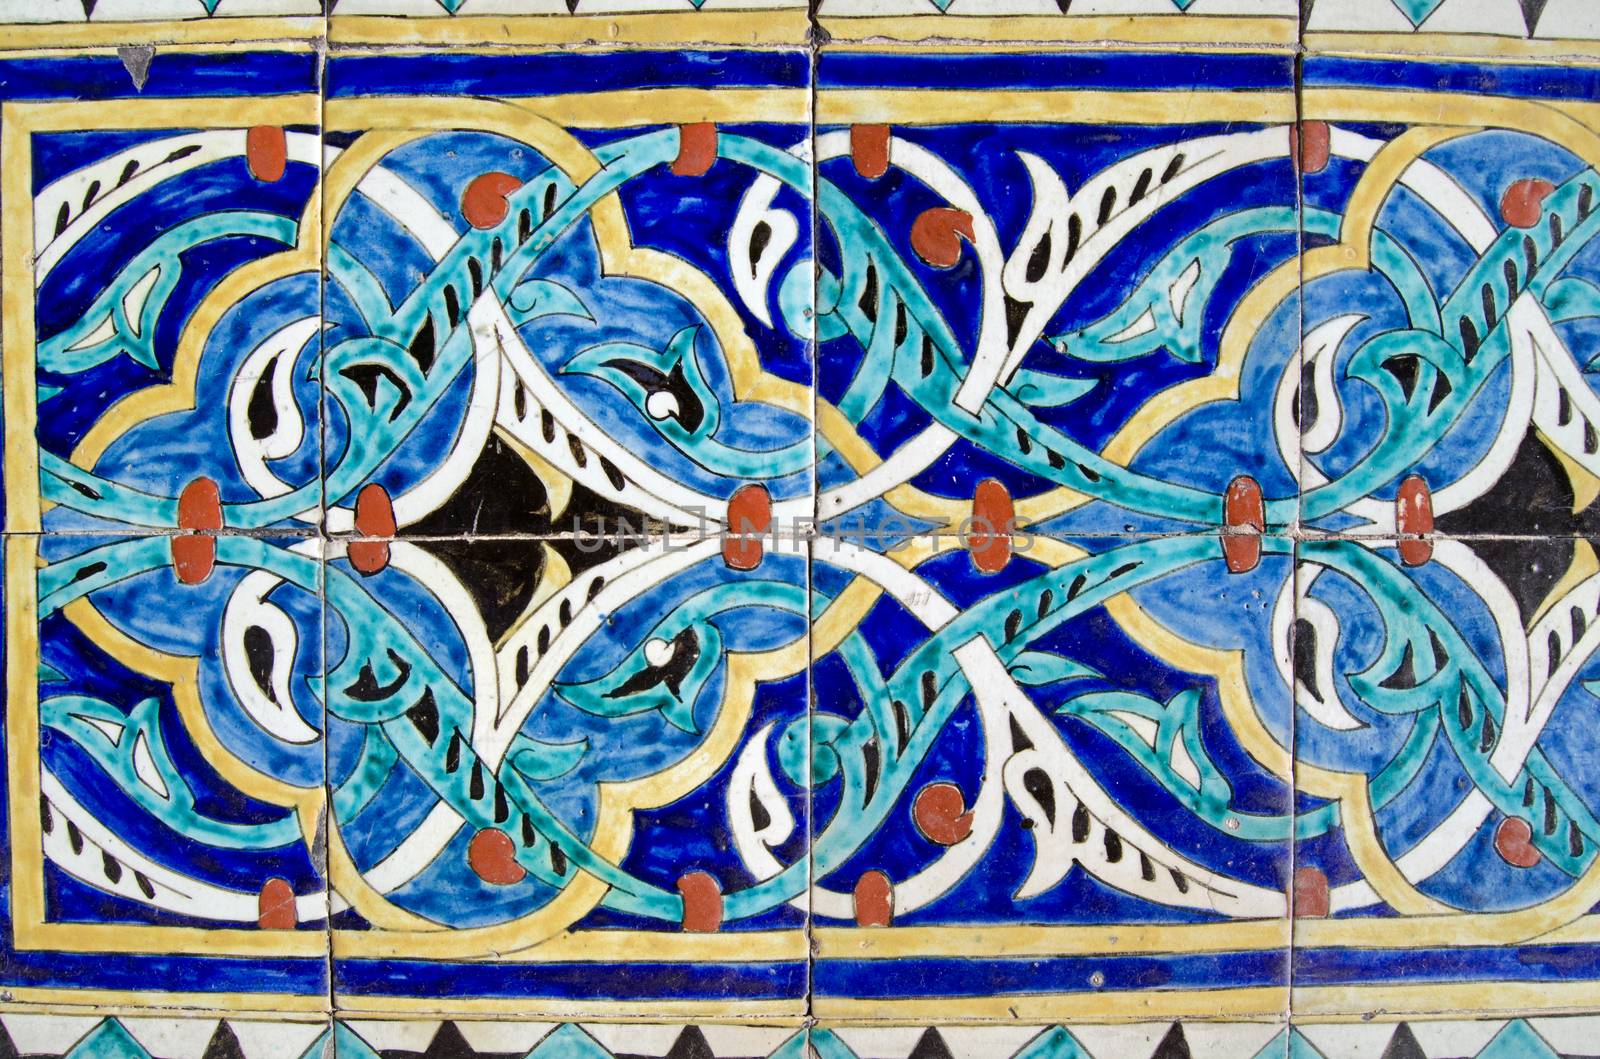 Handpainted, colourful tiles decorating the exterior of an old city mosque dating from the Ottoman era in the middle of Istanbul, Turkey.